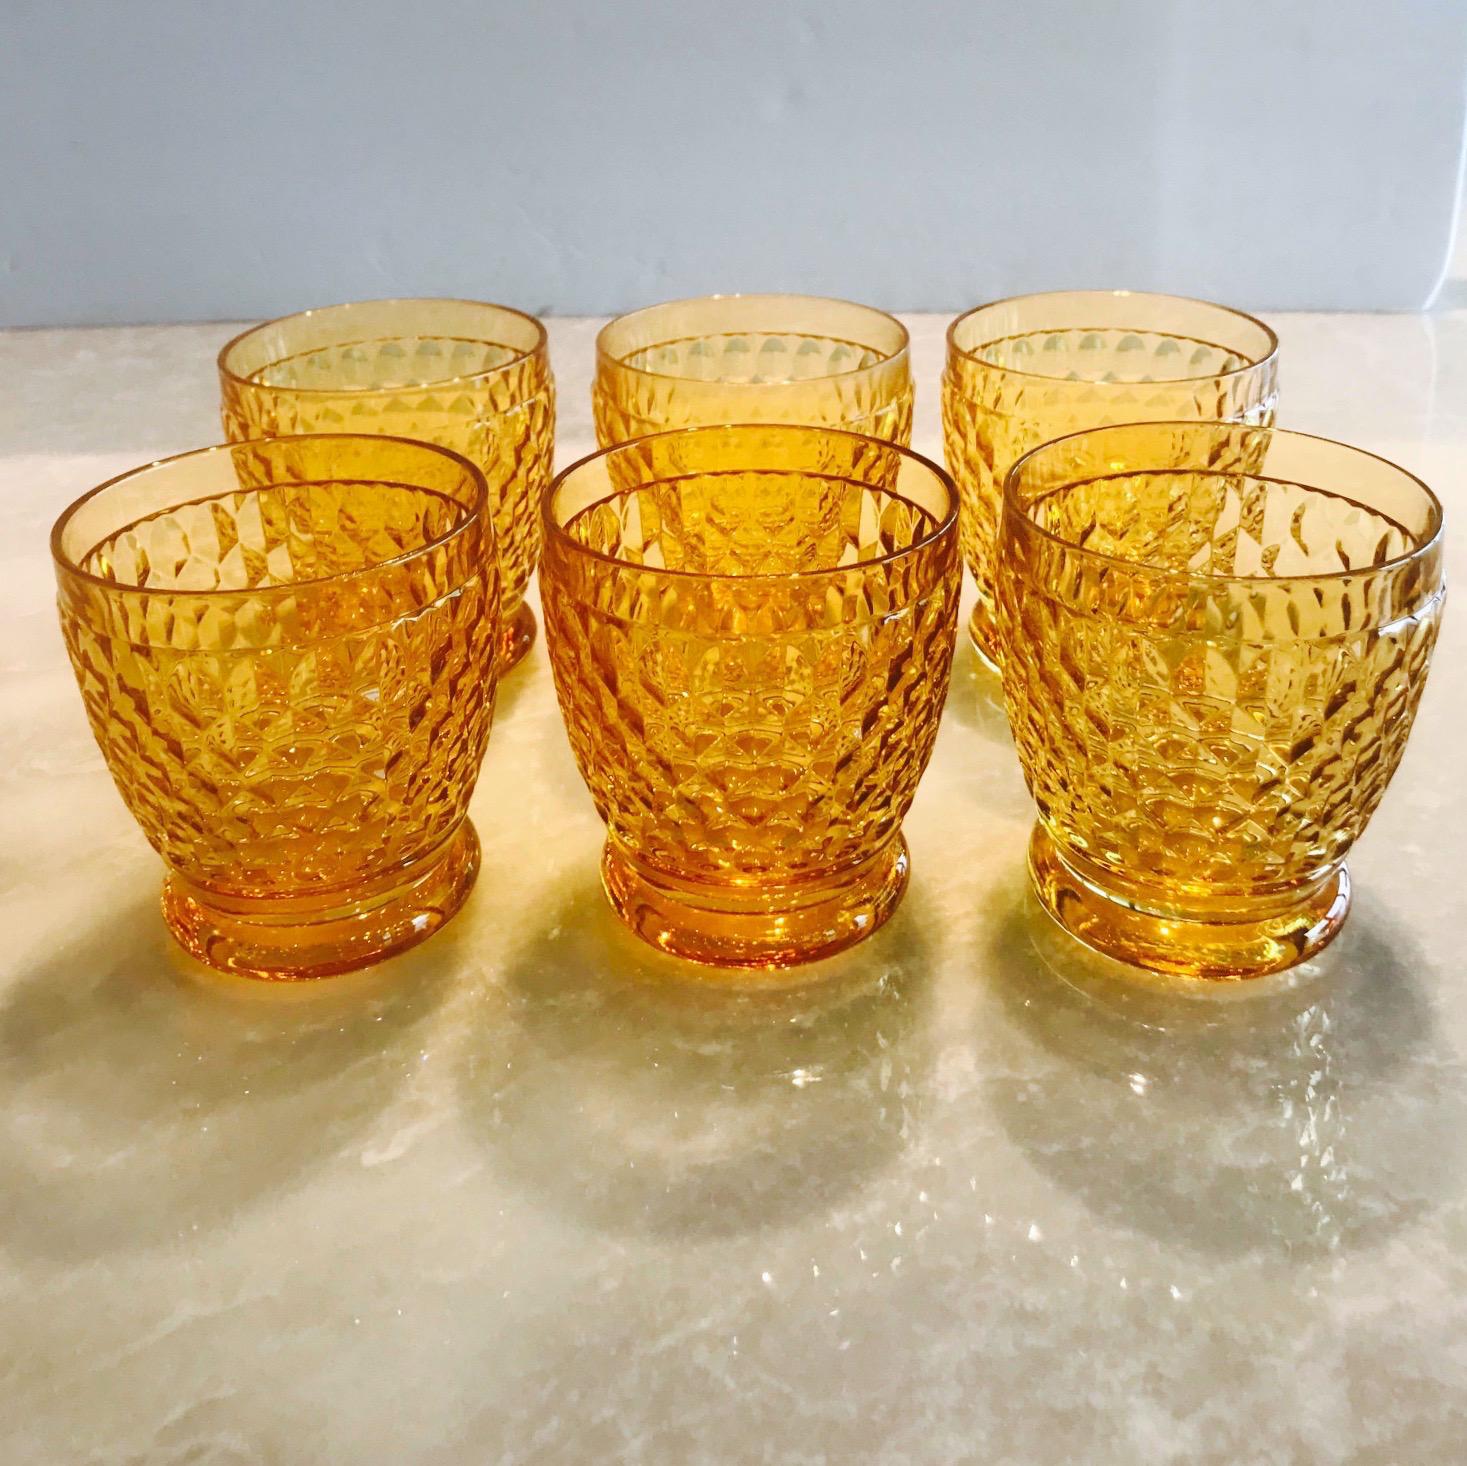 Set of six luxury crystal double old fashioned barware glasses from Villeroy & Boch's Boston series. The glasses are comprised of hobnail crystal with Classic diamond patterns and smooth rounded bases. In gorgeous amber colored crystal, making them